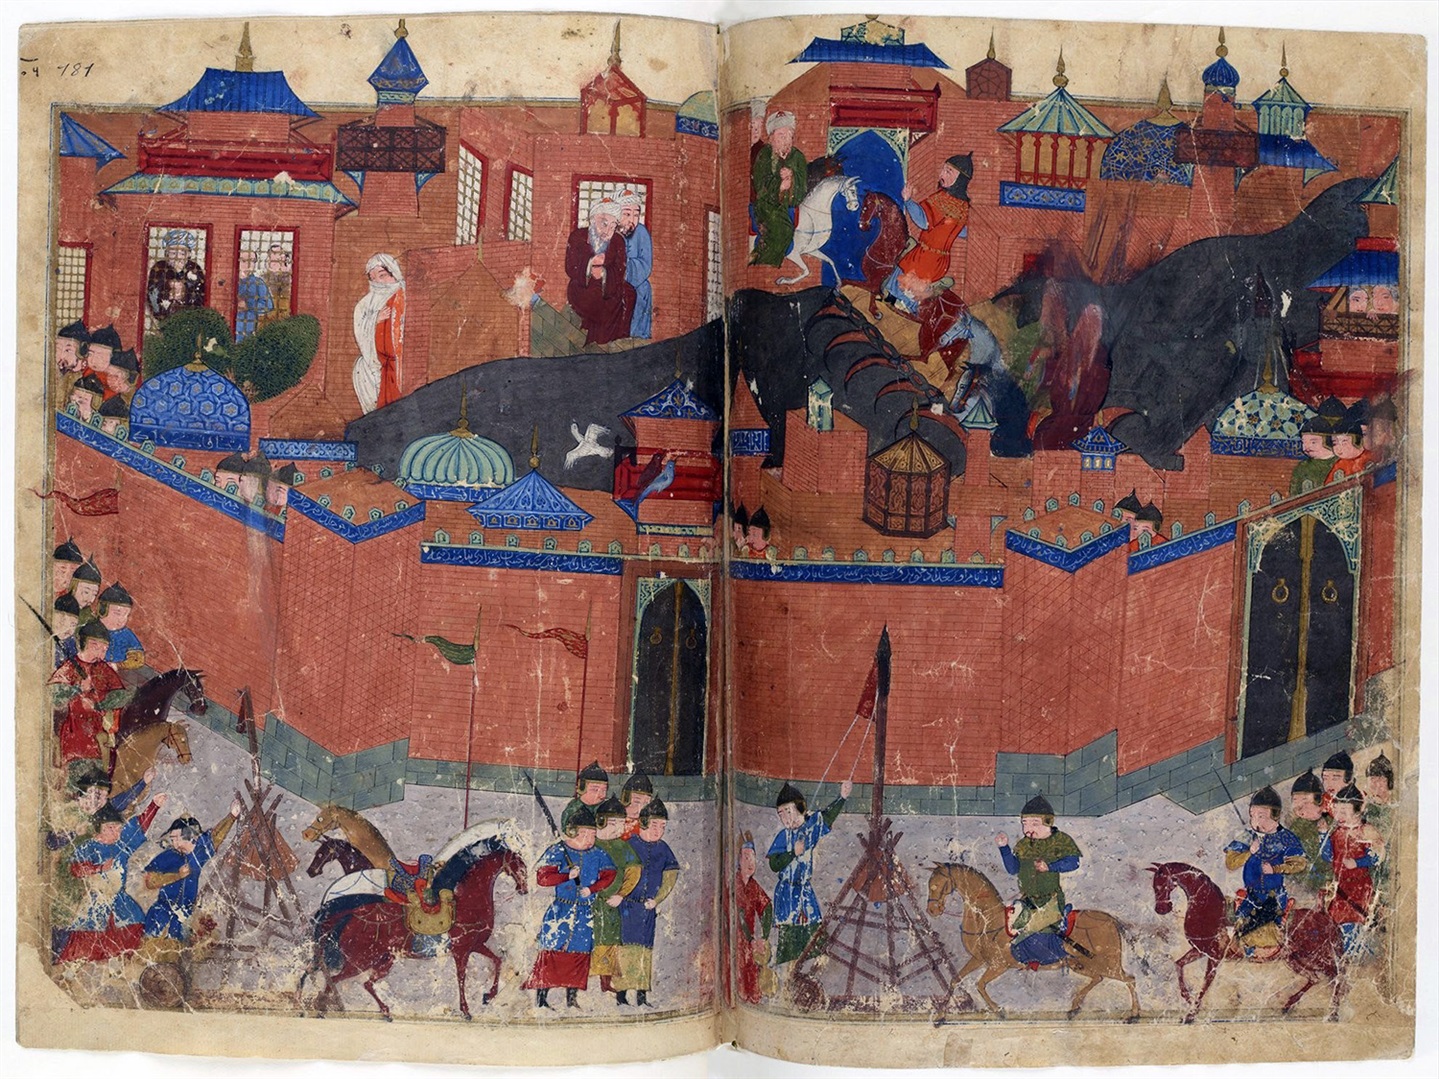 Illustration in a Persian style of a minaret-laden city under siege.